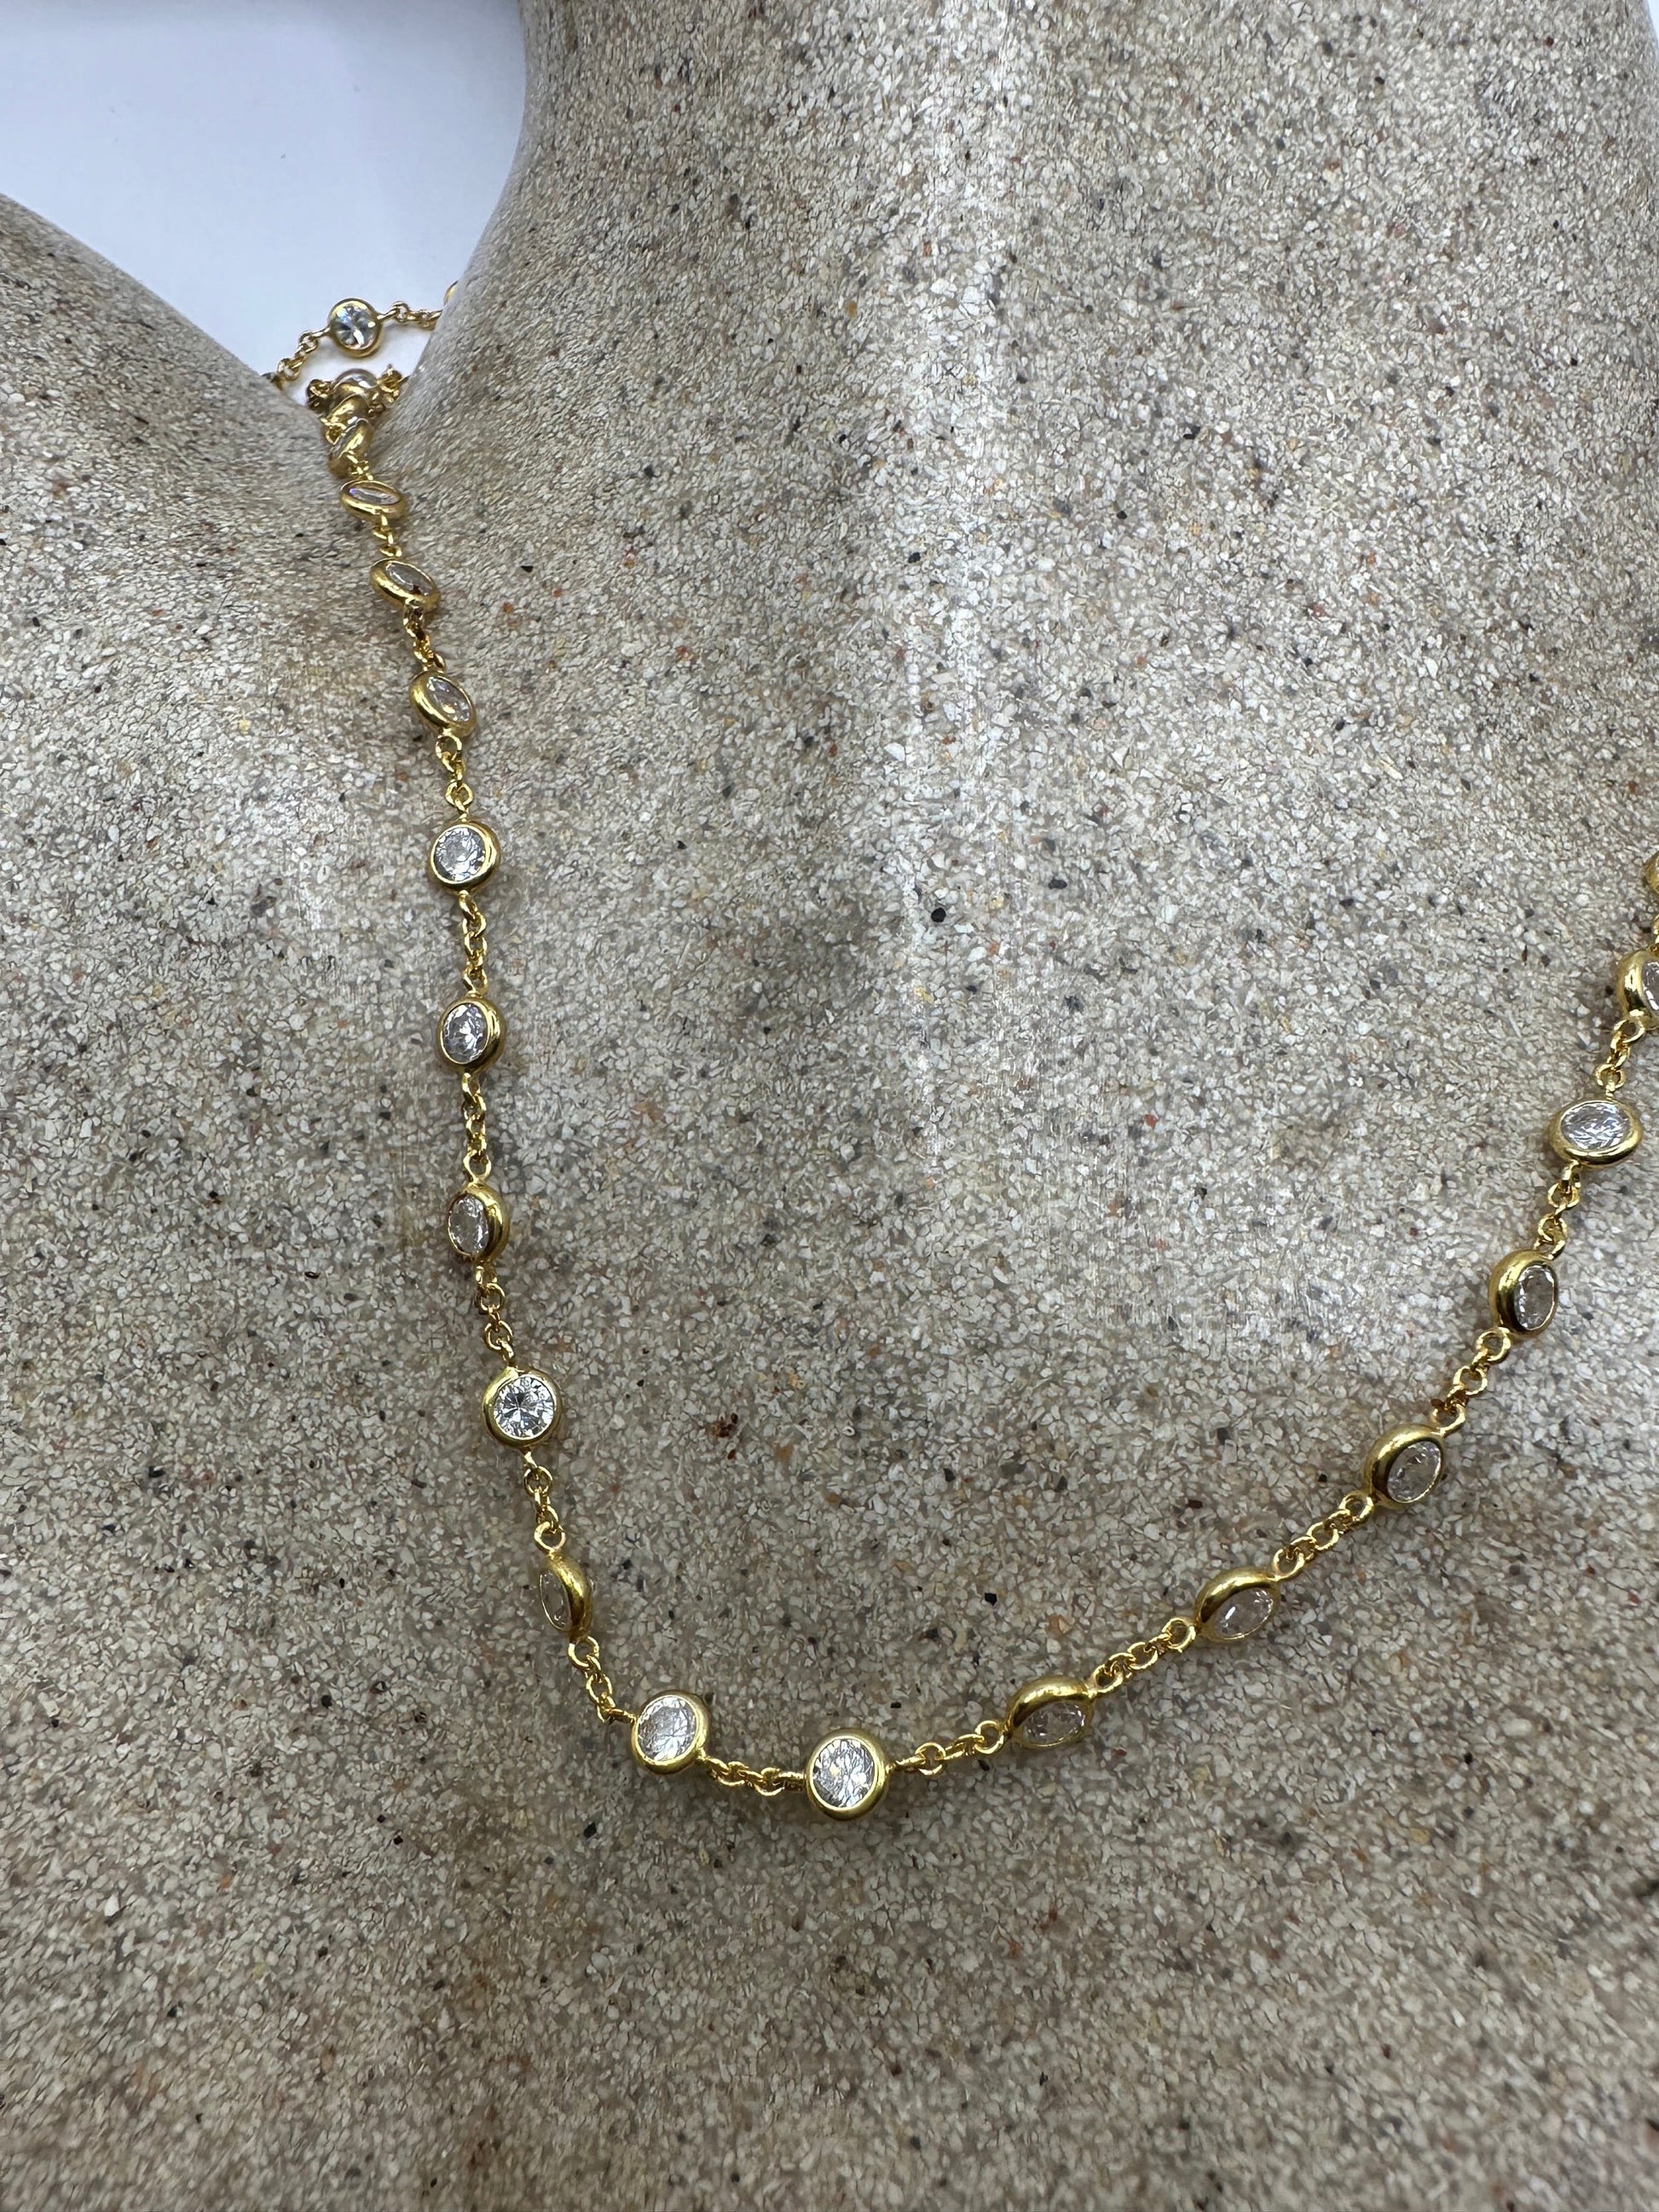 Vintage Crystal Cubic Zirconia Choker Necklace Golden 925 Sterling Silver 33 inches